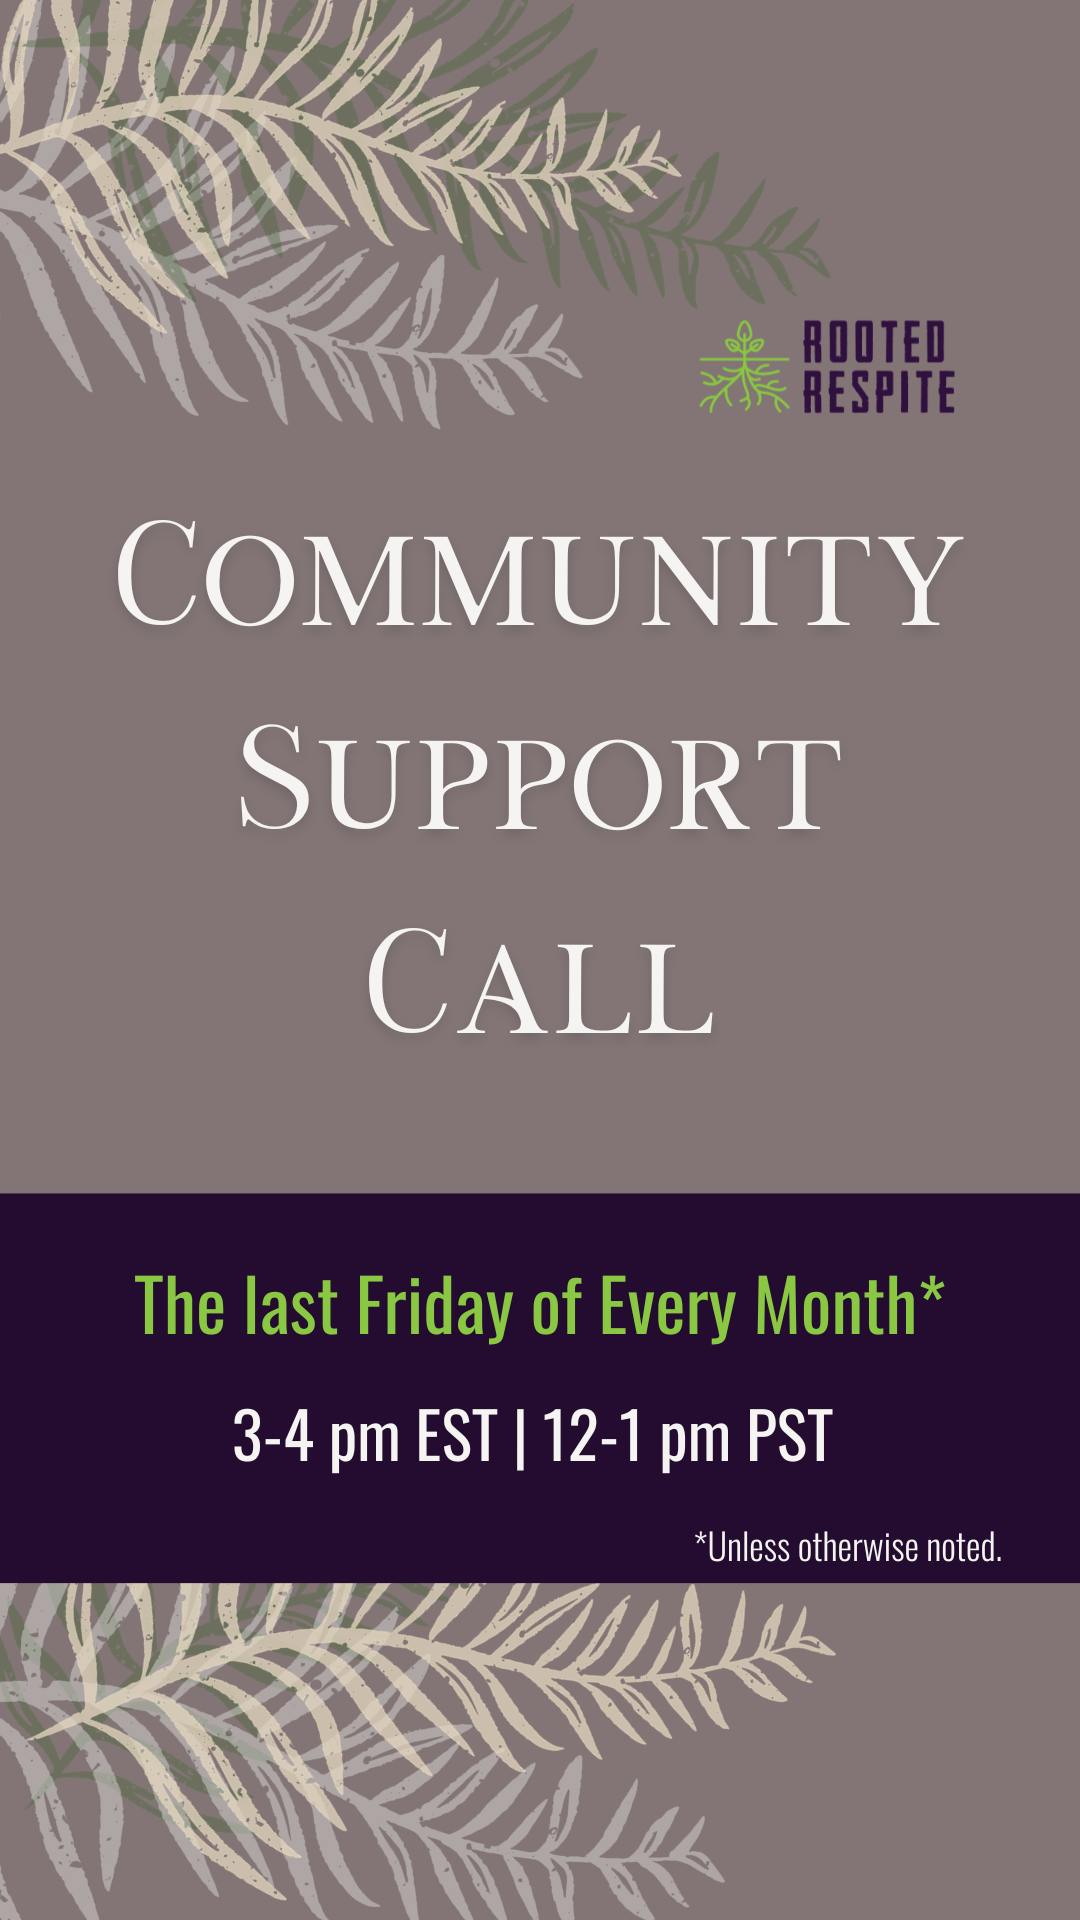 A graphic to advertise our Community Support Calls. Text against a taupe background reads: "Community Support Call, The last Friday of every month (unless otherwise noted). 3-4 pm EST | 12-1 pm PST